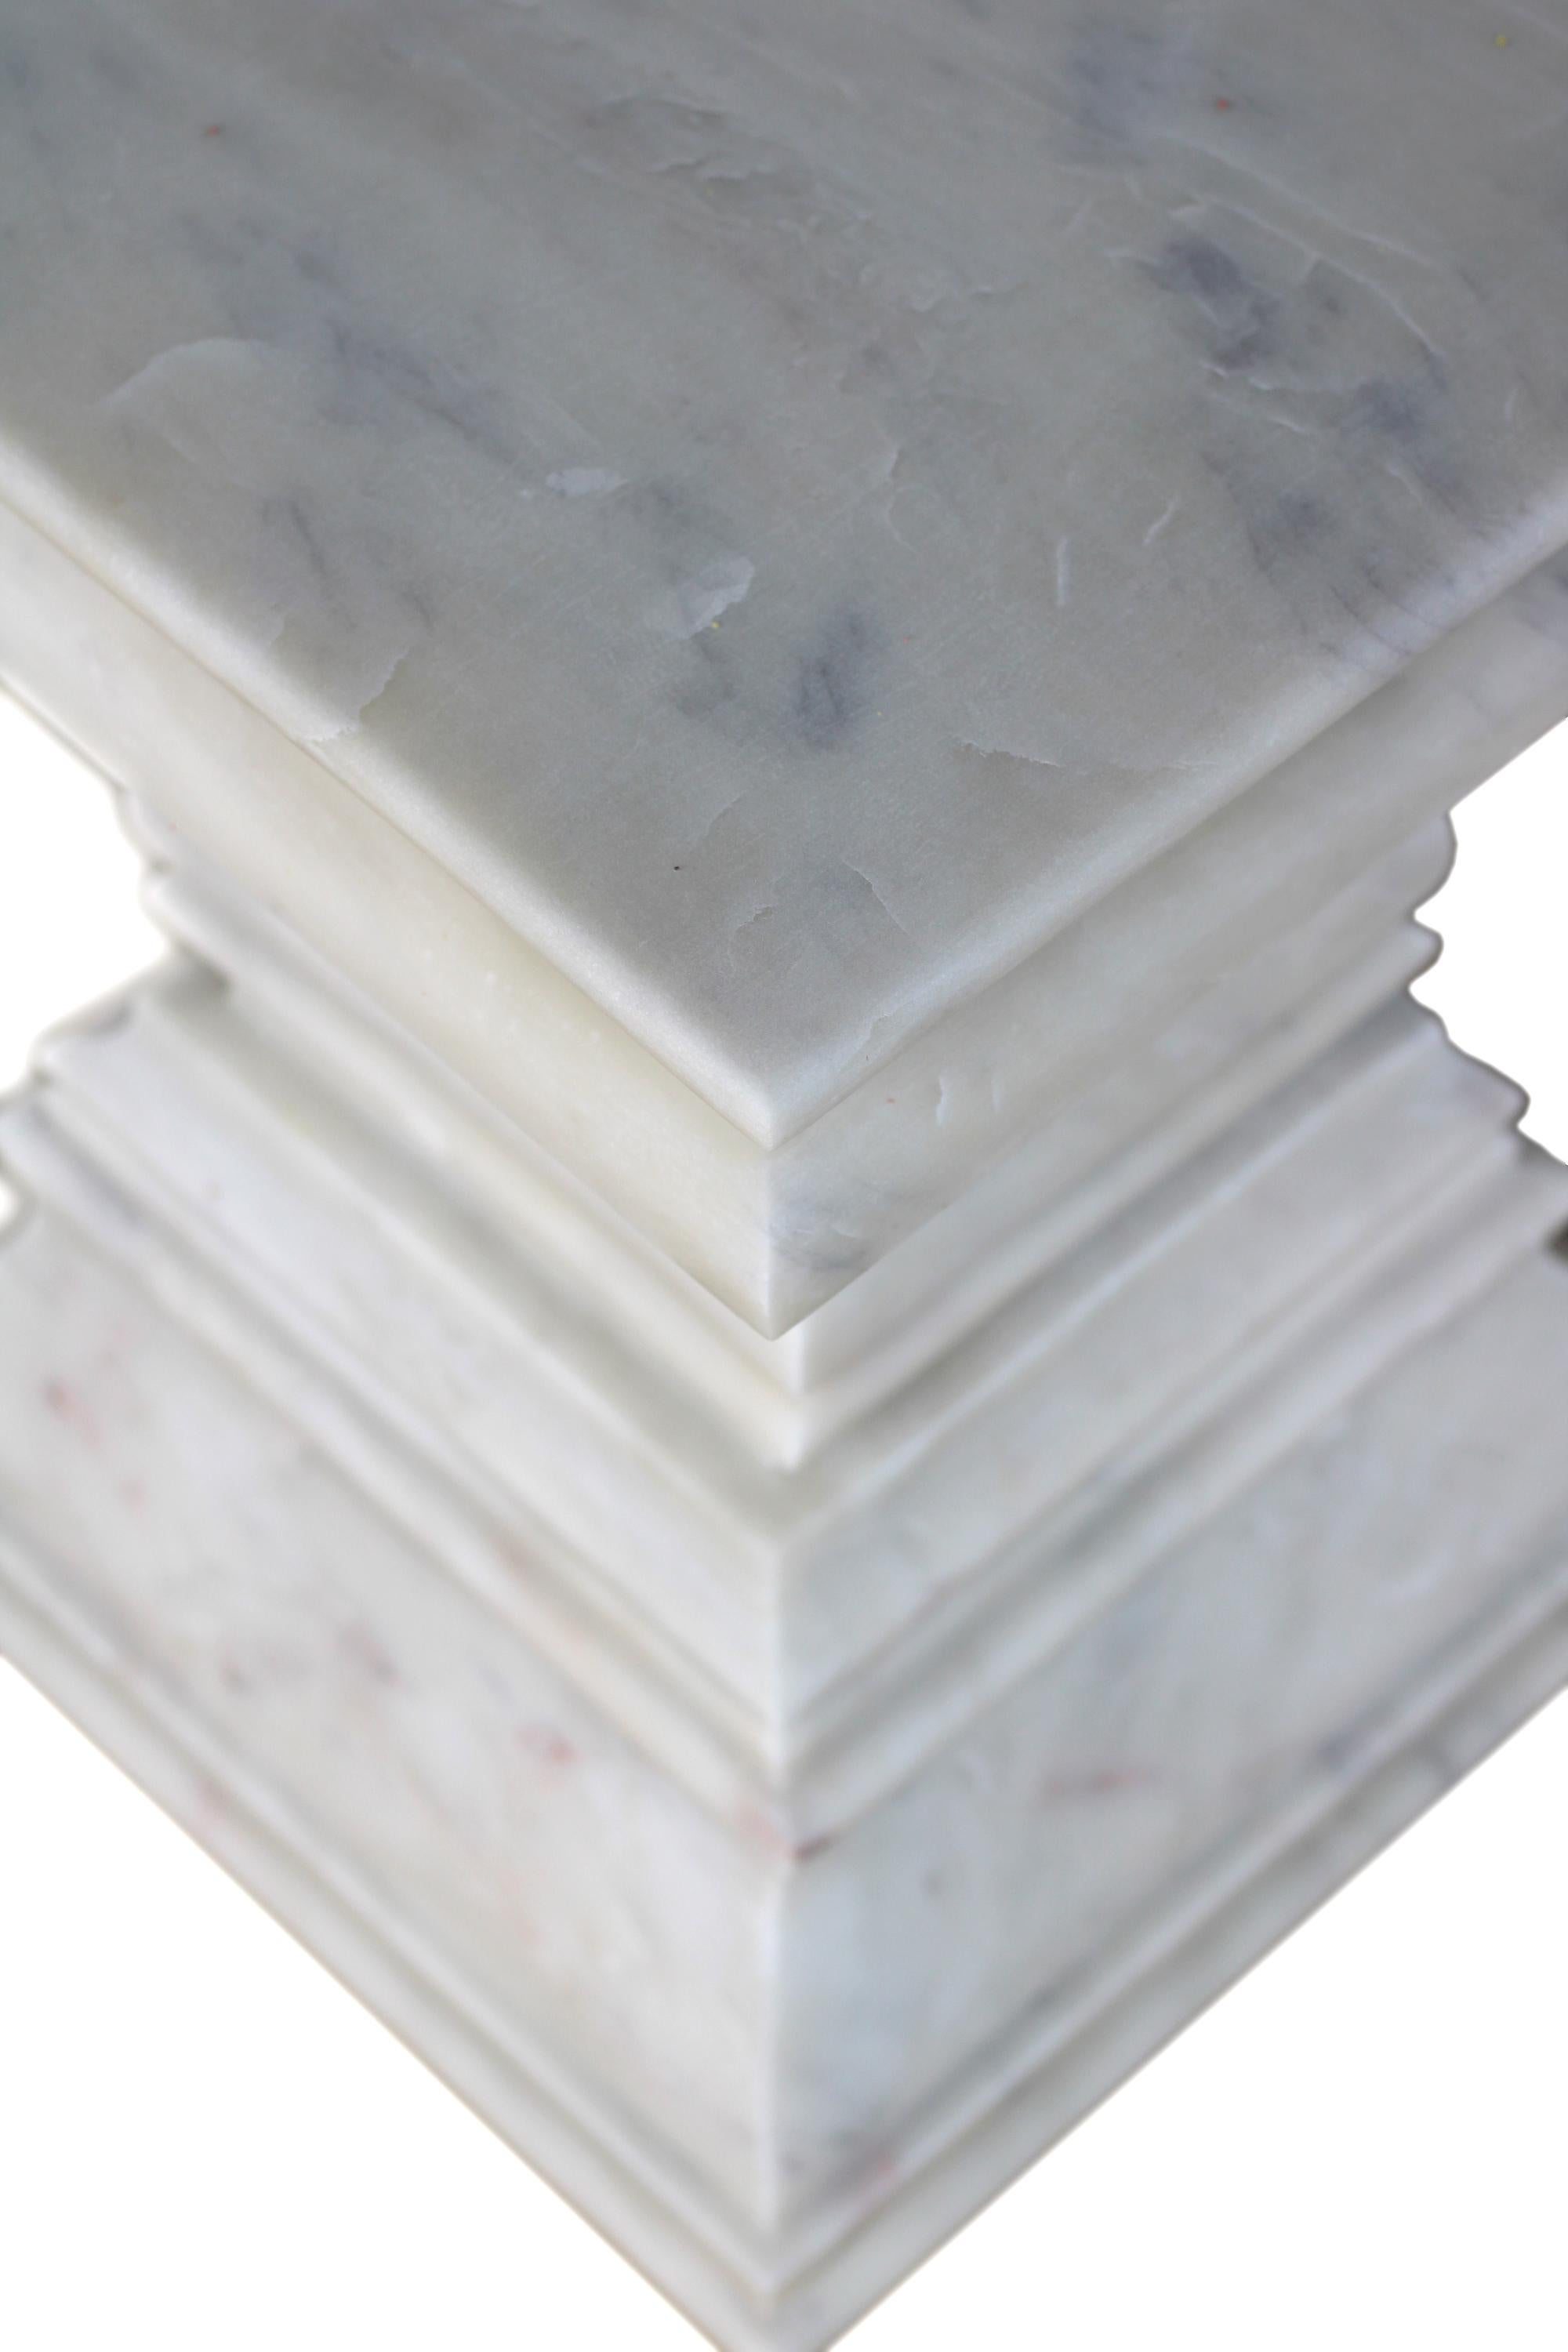 Modern marble pedestal and column side table in white marble by S. Odegard is Inspired by the column capitals of the roman architectural style, this modern marble pedestal and column side table is a statement piece. A sculpture marble pedestal and